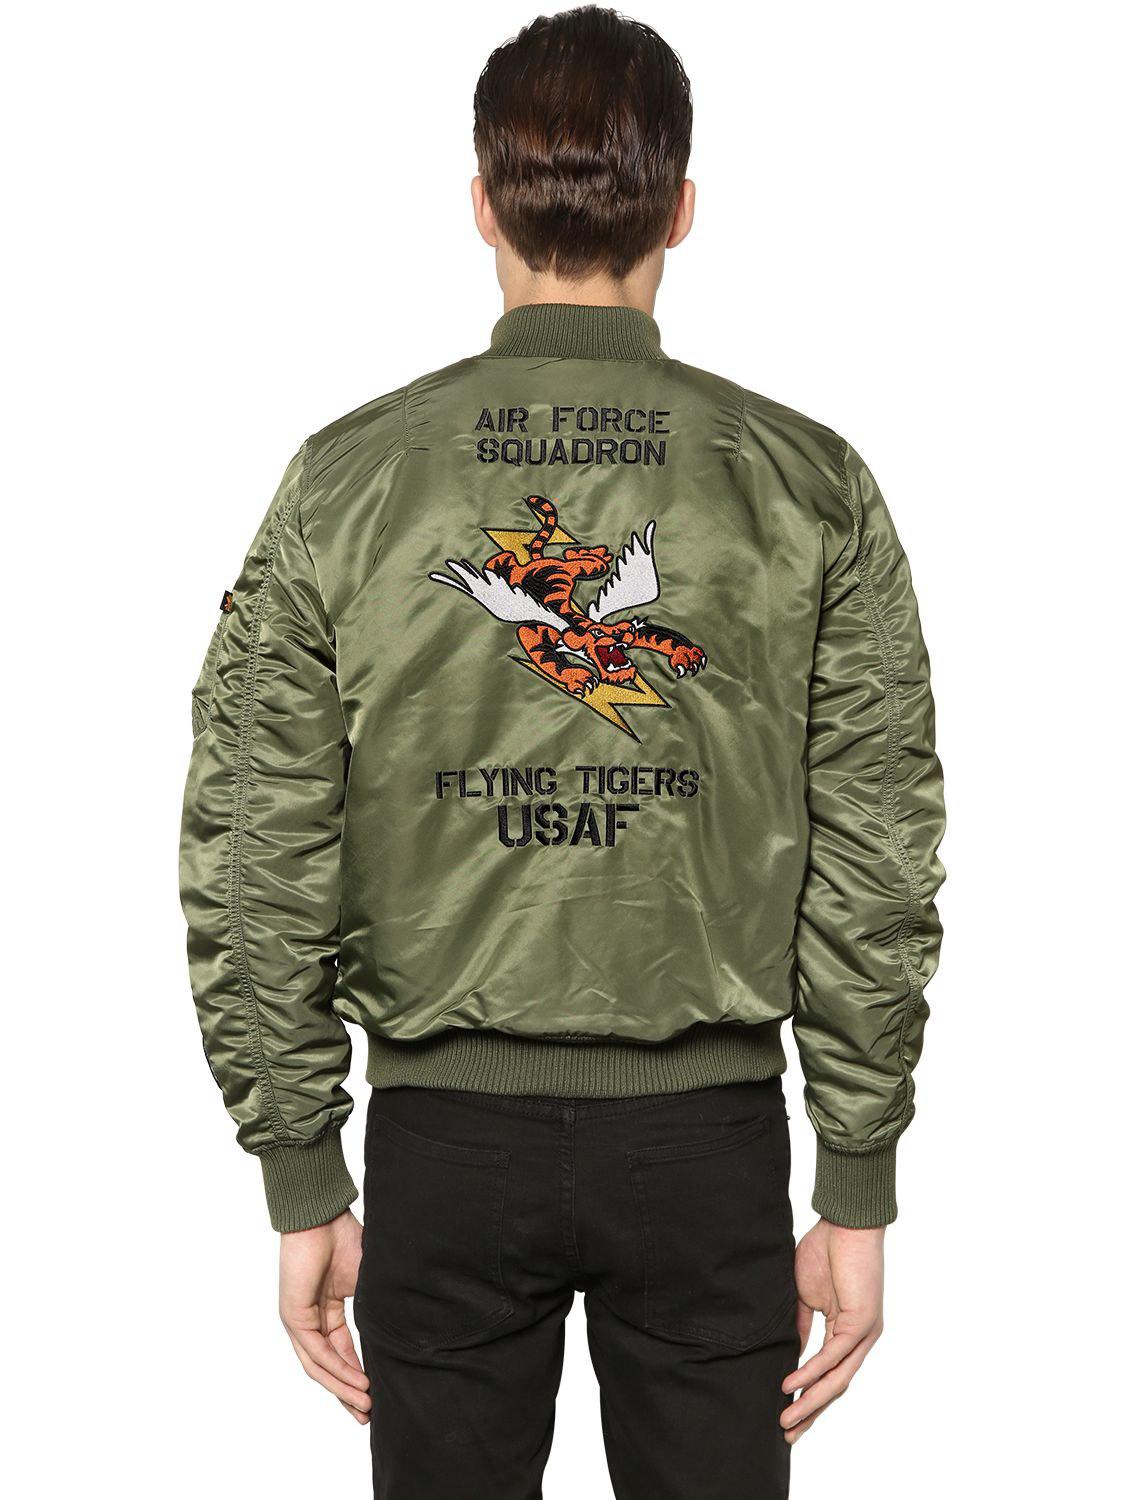 Alpha Industries Ma-1 Vf Flying Tigers Slim Bomber Jacket in Sage Green  (Green) for Men - Lyst